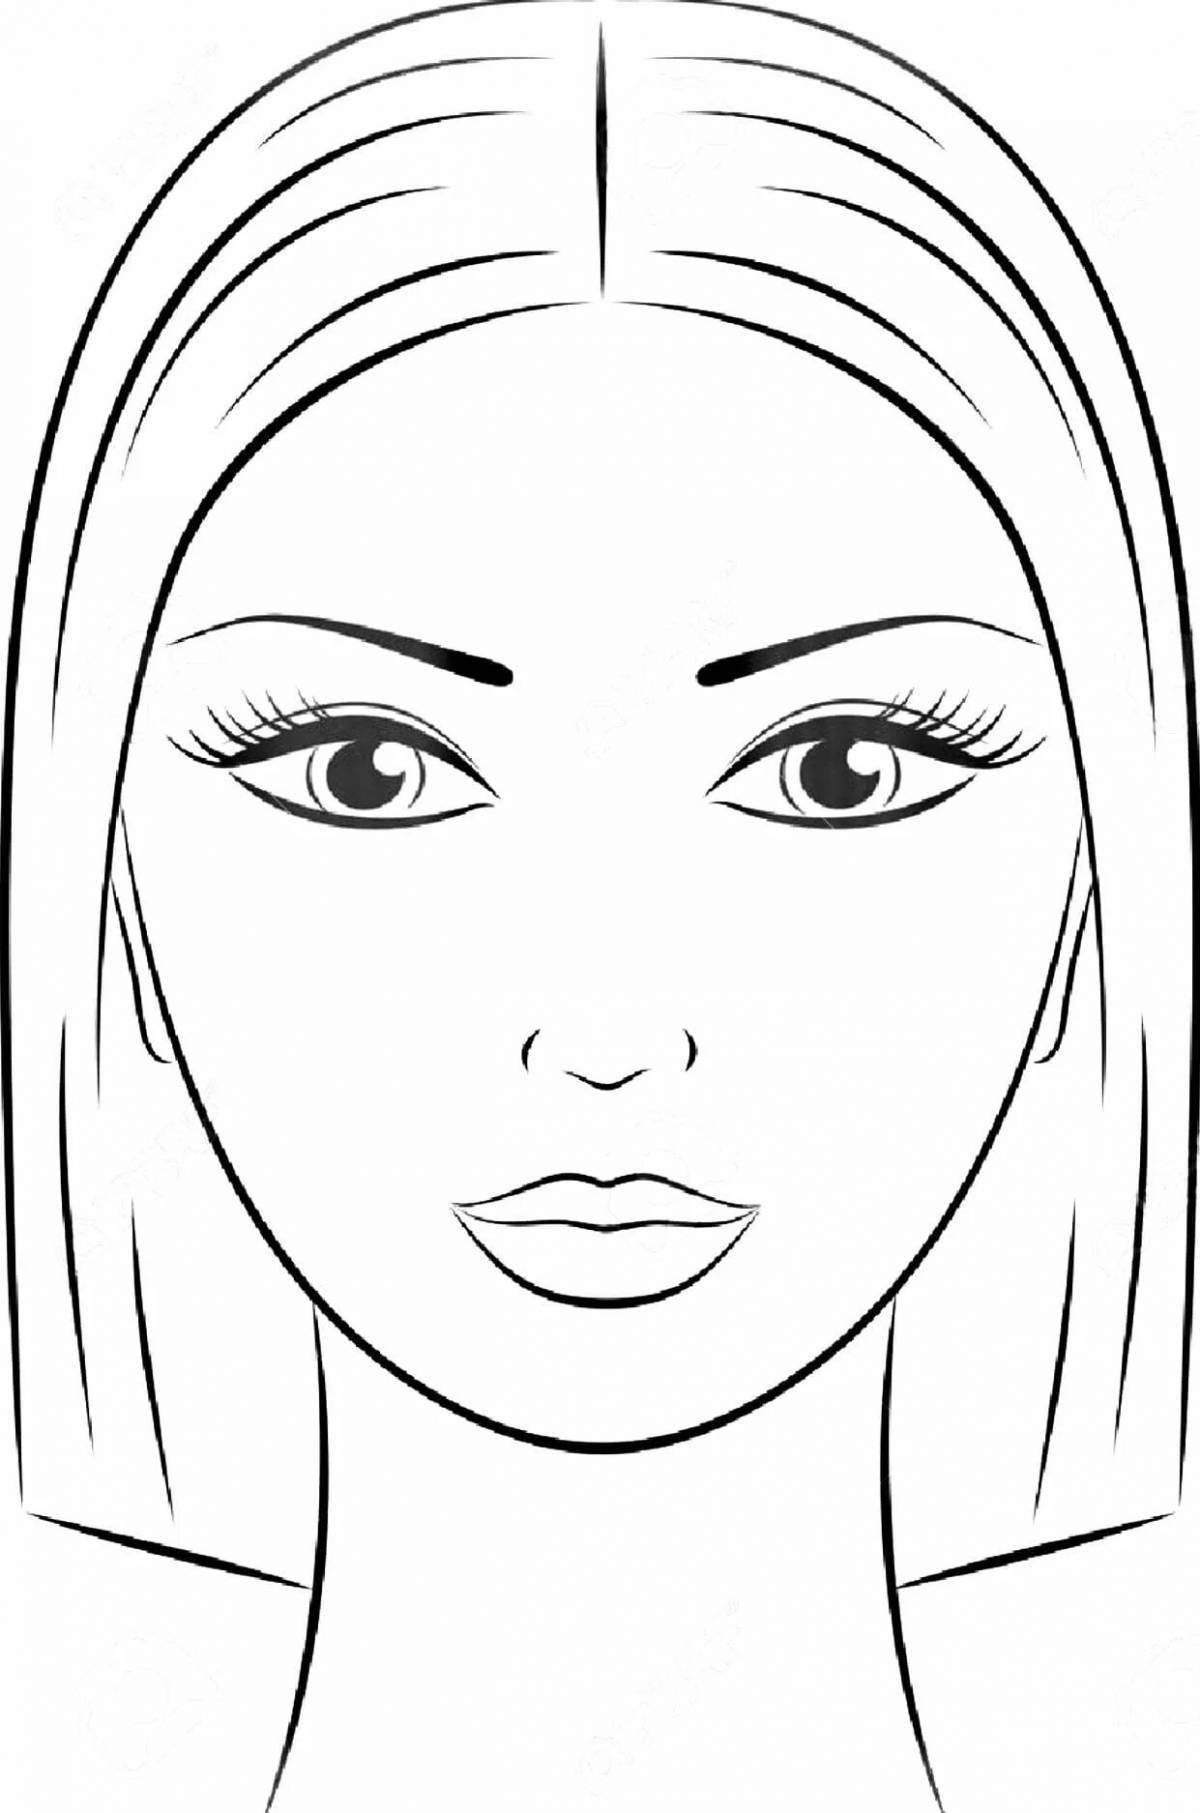 Awesome girls makeup coloring page